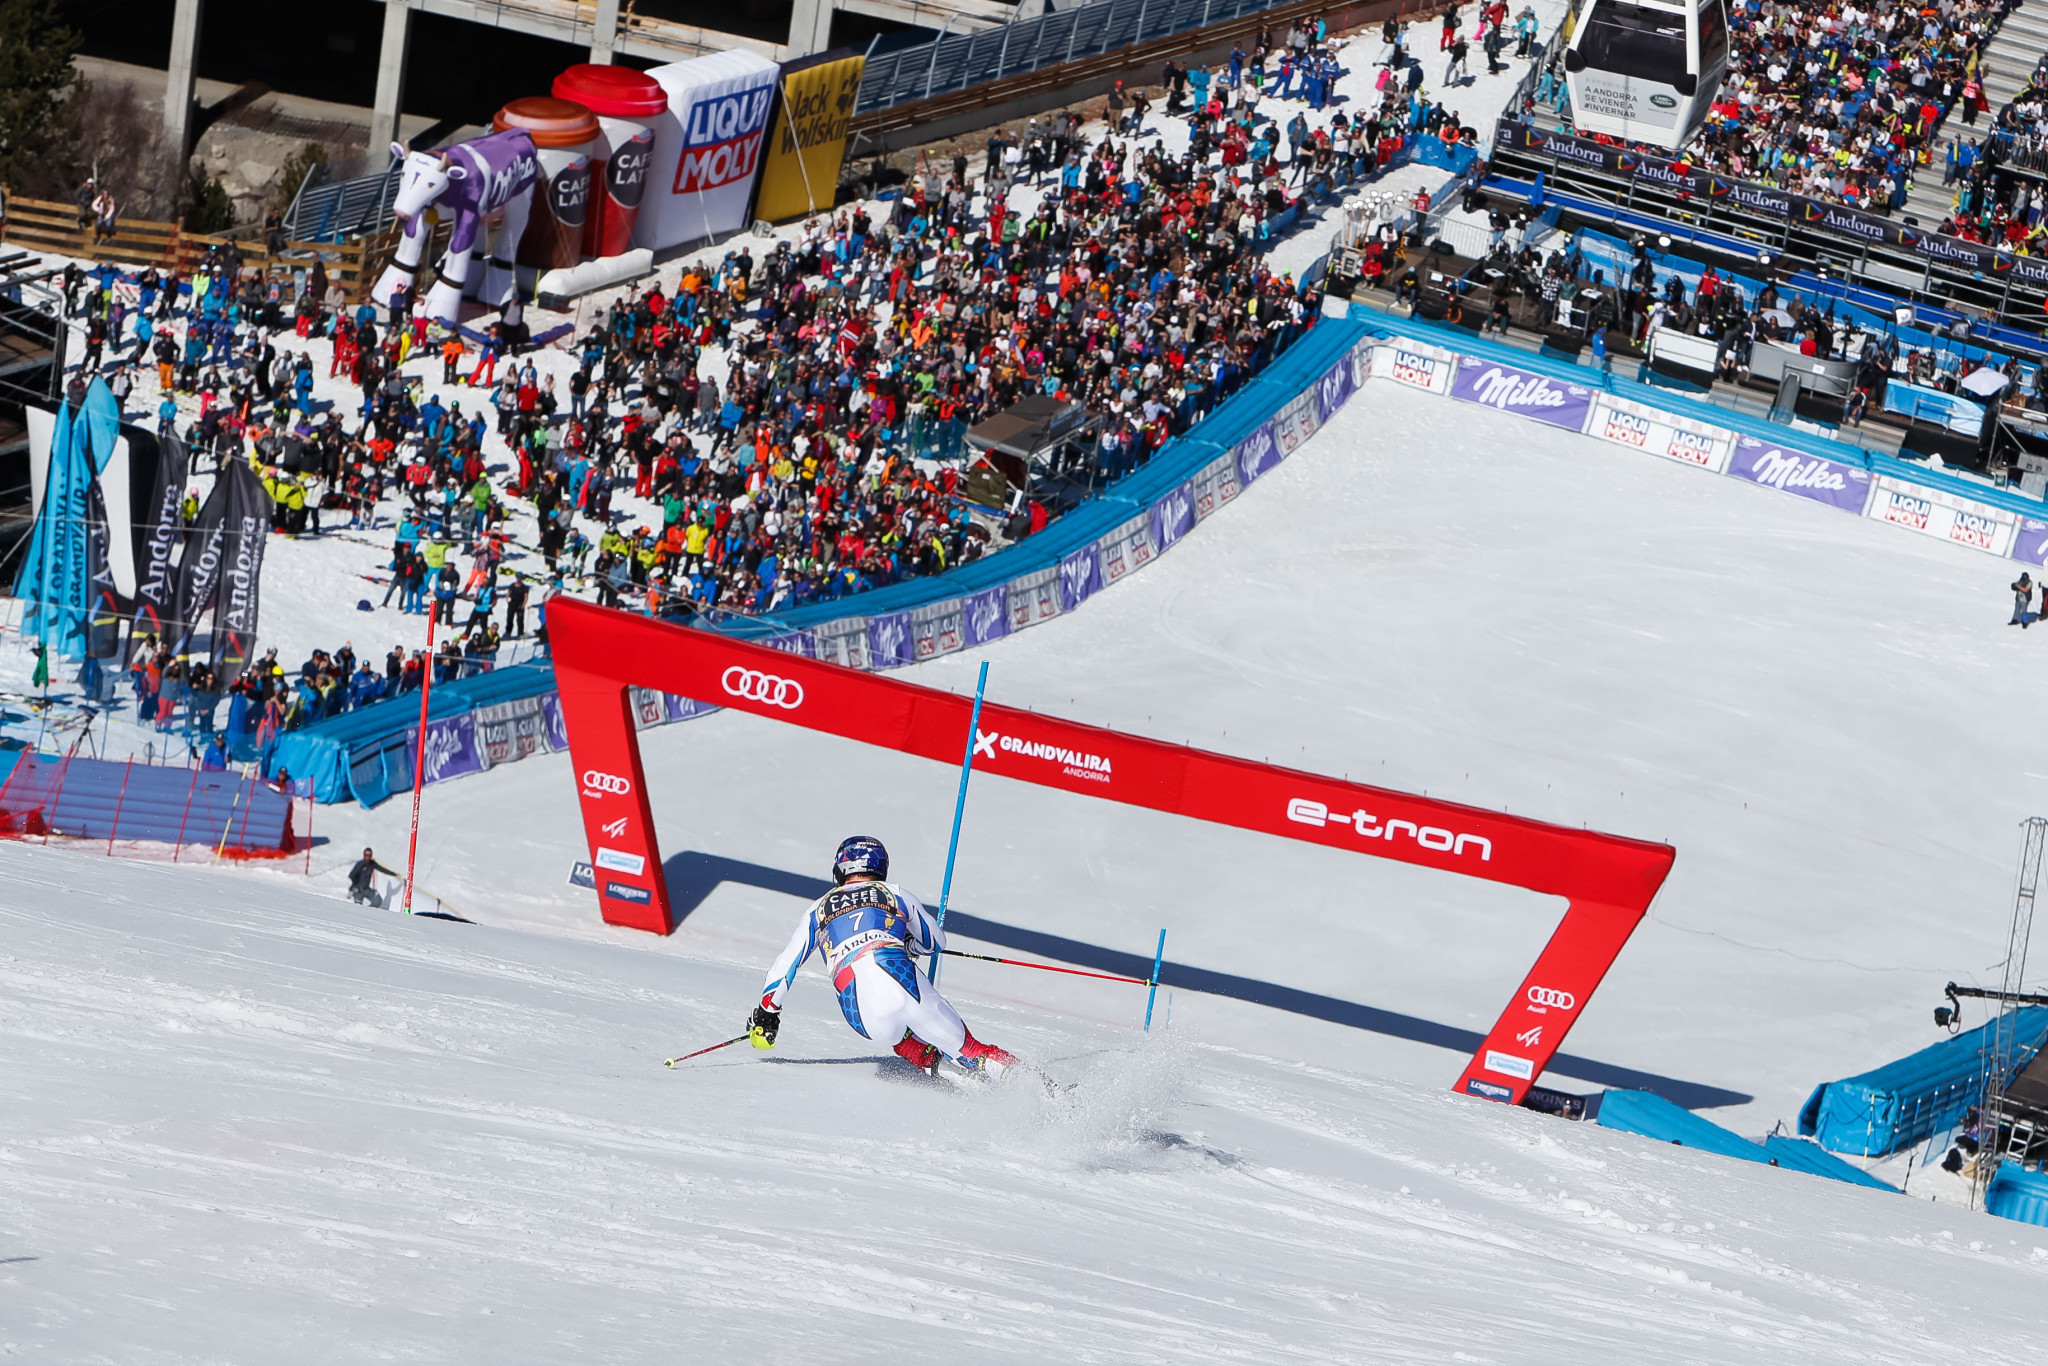 Soldeu is one of the bidders for the 2027 Alpine World Ski Championships ©Getty Images